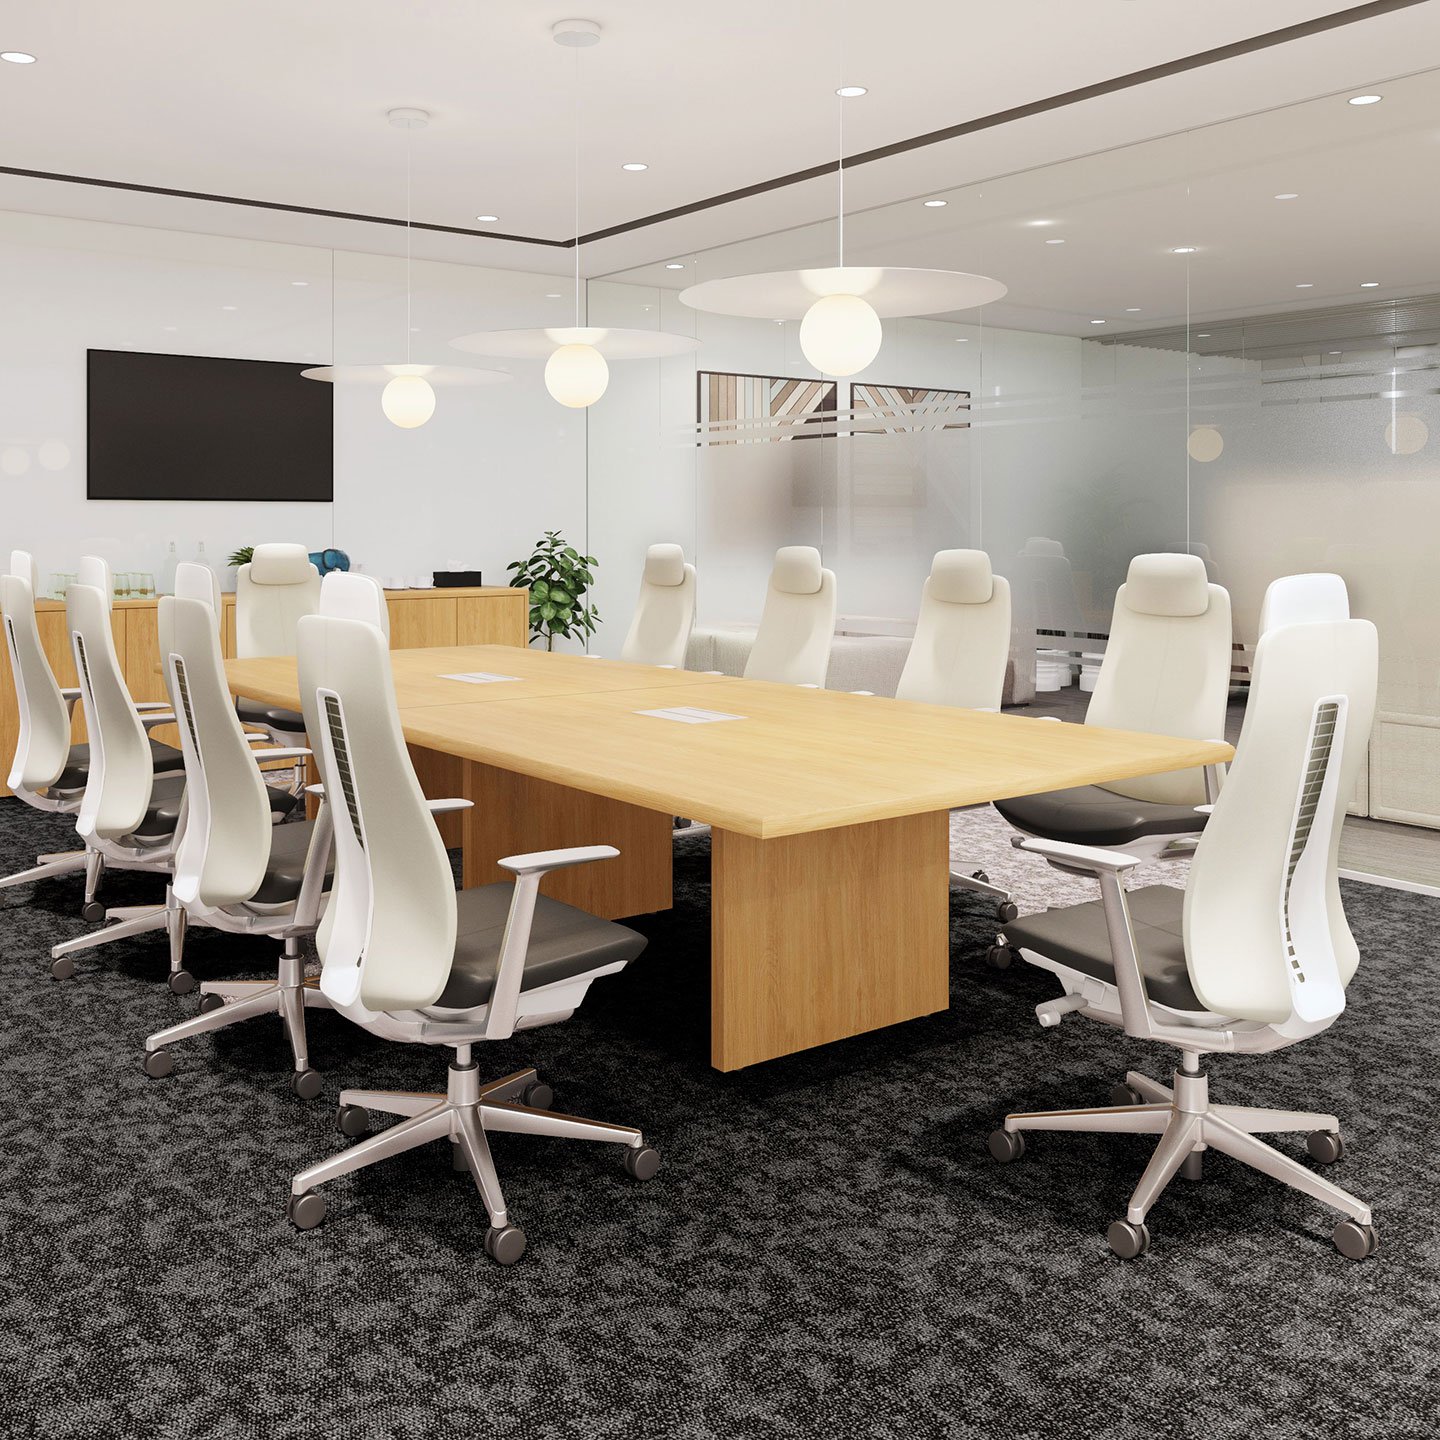 Haworth Wood Conference table in conference room with haworth fern chairs and monitor and glass walls